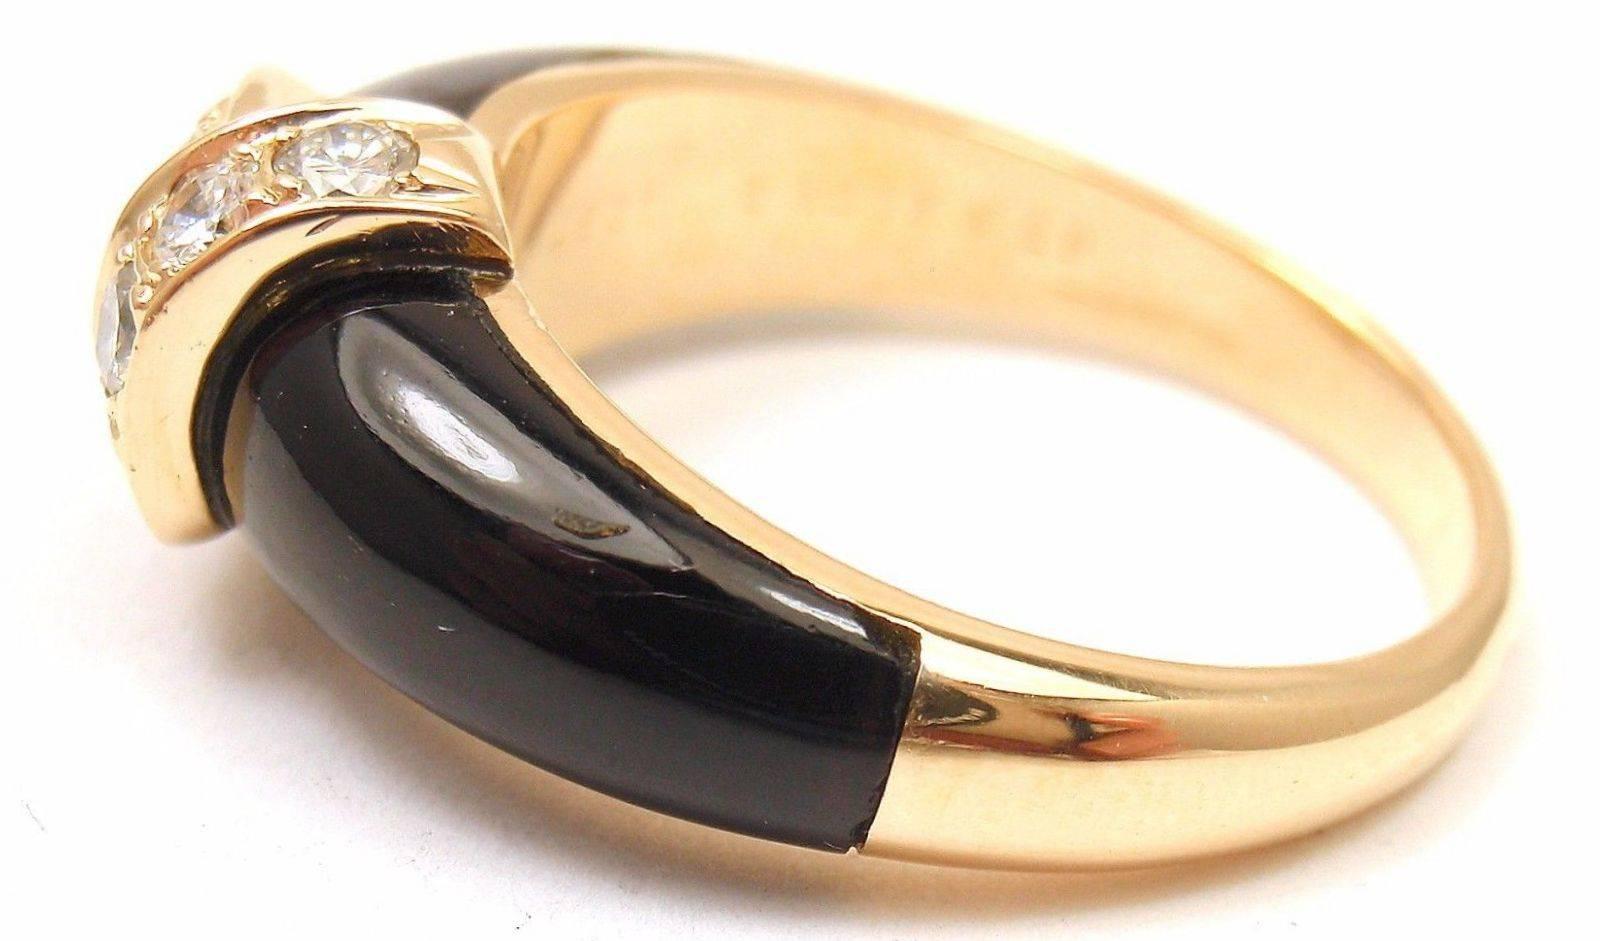 18k Yellow Gold Diamond & Black Onyx Ring by Van Cleef & Arpels. 
With 10 diamonds, VS clarity, G color. Total Diamond Weight: 45ct. 

Details: 
Ring Size: 6.5
Width: 8mm
Weight: 5.8 grams
Stamped Hallmarks:  750 Van Cleef and Arpels 0.45